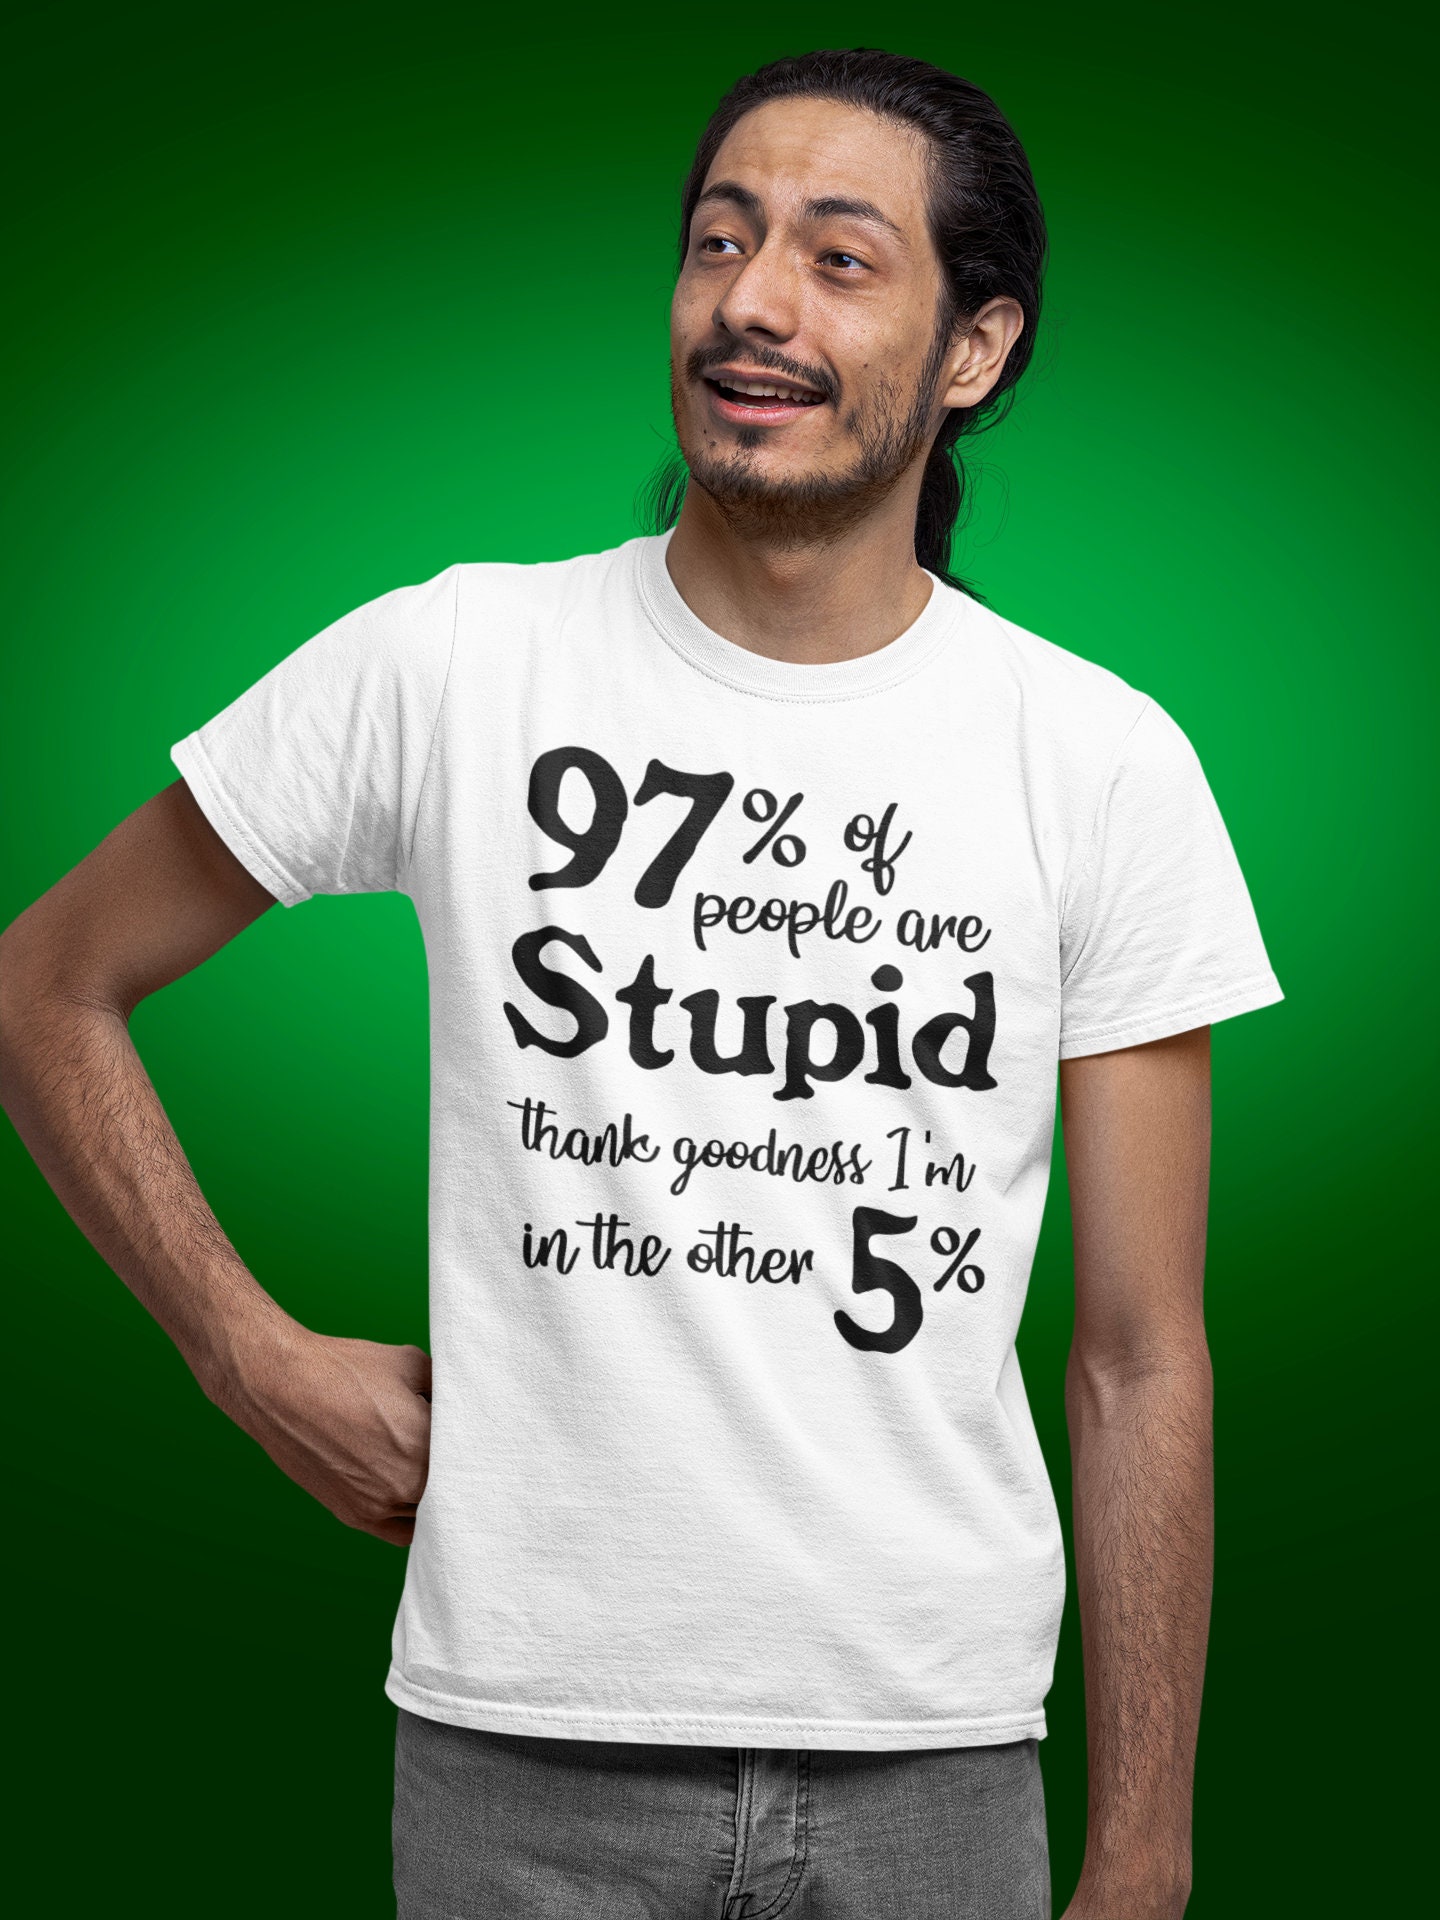 People Are Stupid T Rude Adult Humor Shirts Offensive - Canada